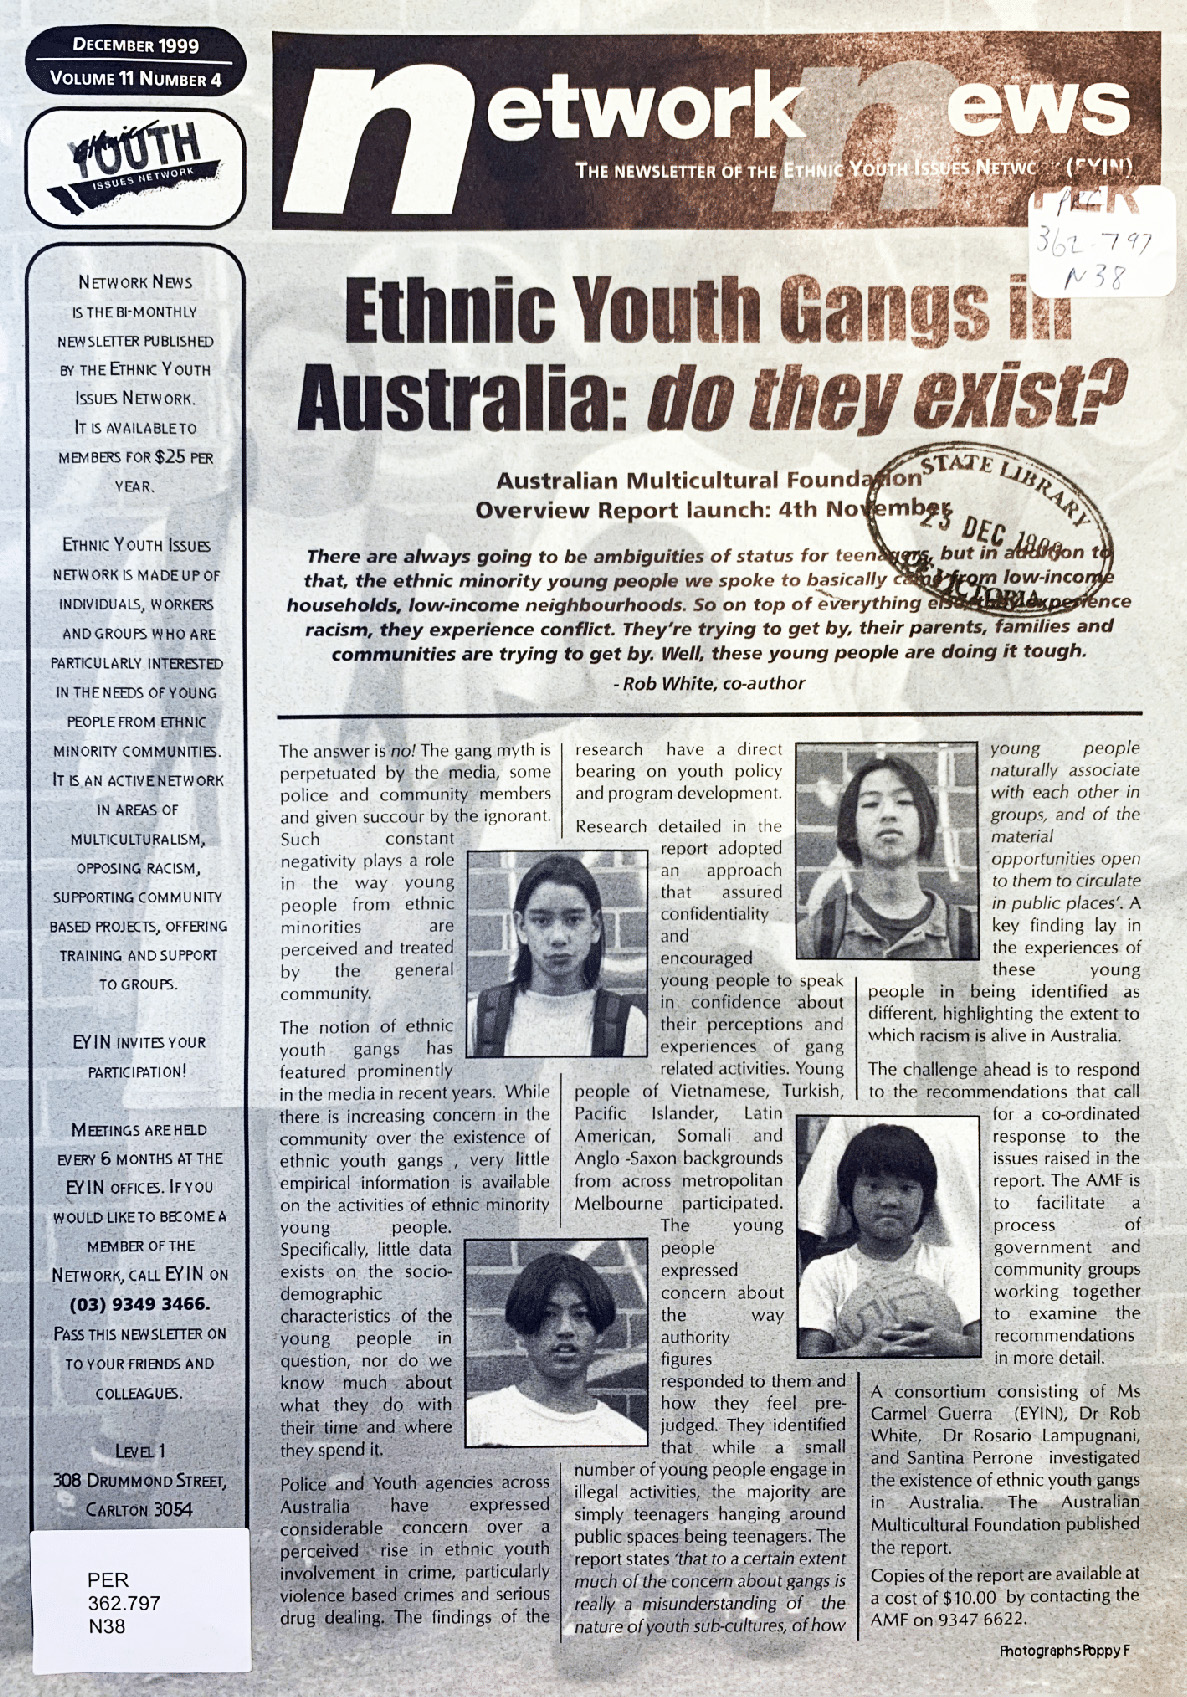 Ethnic Youth Gangs in Australia: do they exist?